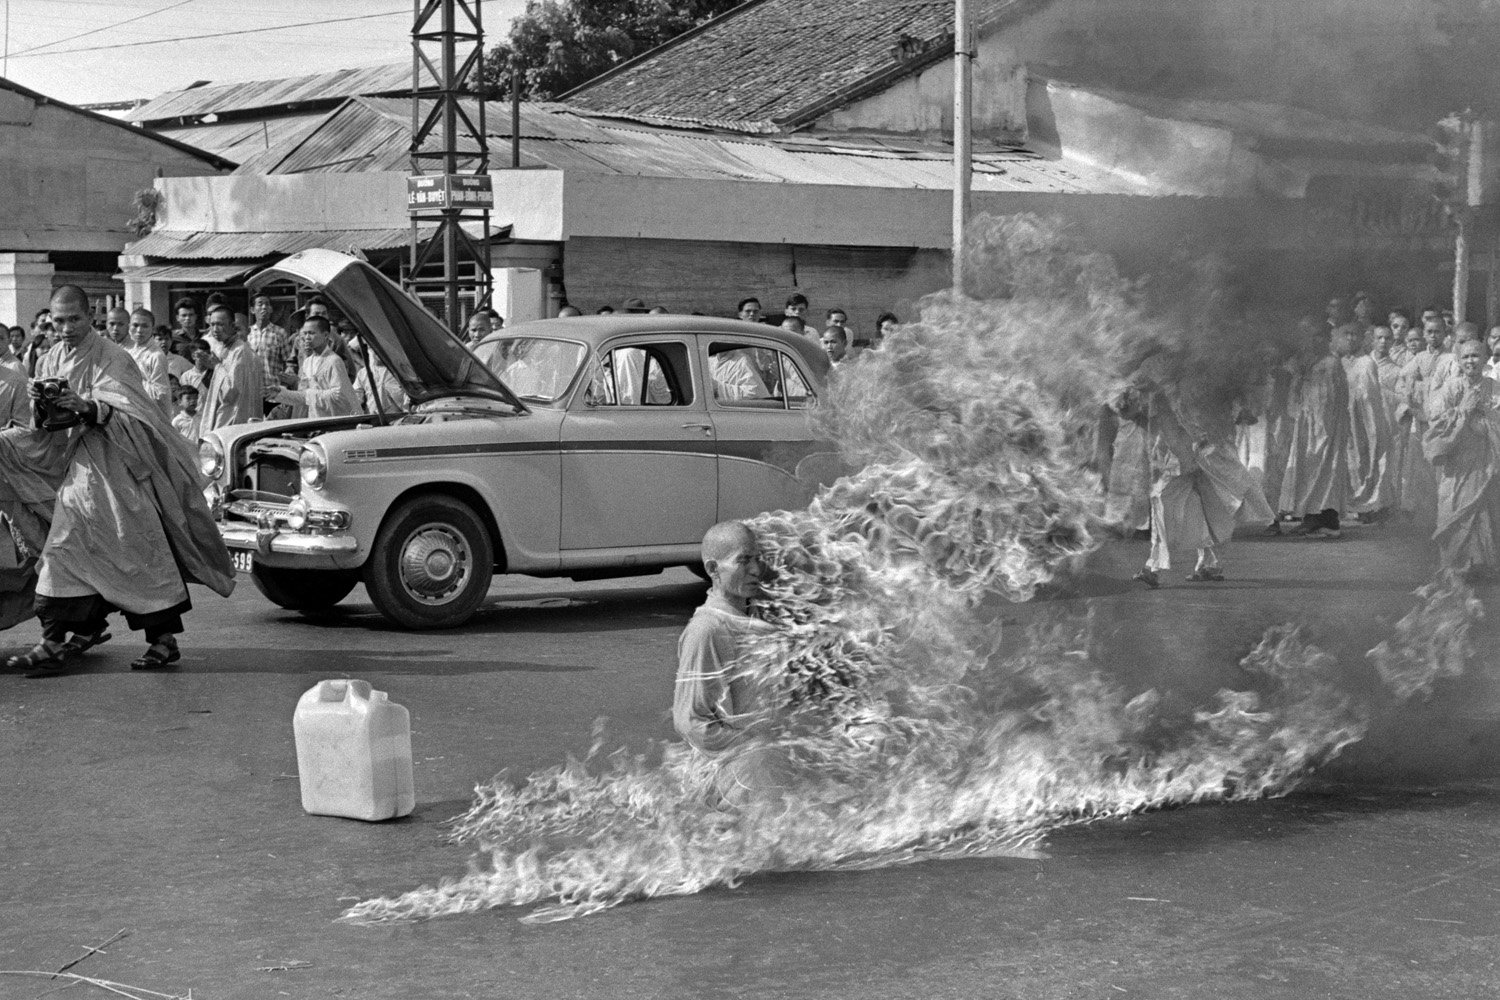 The Burning Monk - Malcolm Browne’s 1963 photo of a Buddhist monk calmly setting himself on fire on the streets of Saigon to protest against the U.S.-supported South Vietnamese government is still considered one of the most striking and iconic images of the Vietnam war. It was published in newspapers around the world the next day, and prompted president John F. Kennedy to declare “No news picture in history has generated so much emotion around the world as that one.” The photo contributed significantly to the direction of the war, inciting the U.S to put pressure on the South Vietnam regime to end persecution of Buddhists.